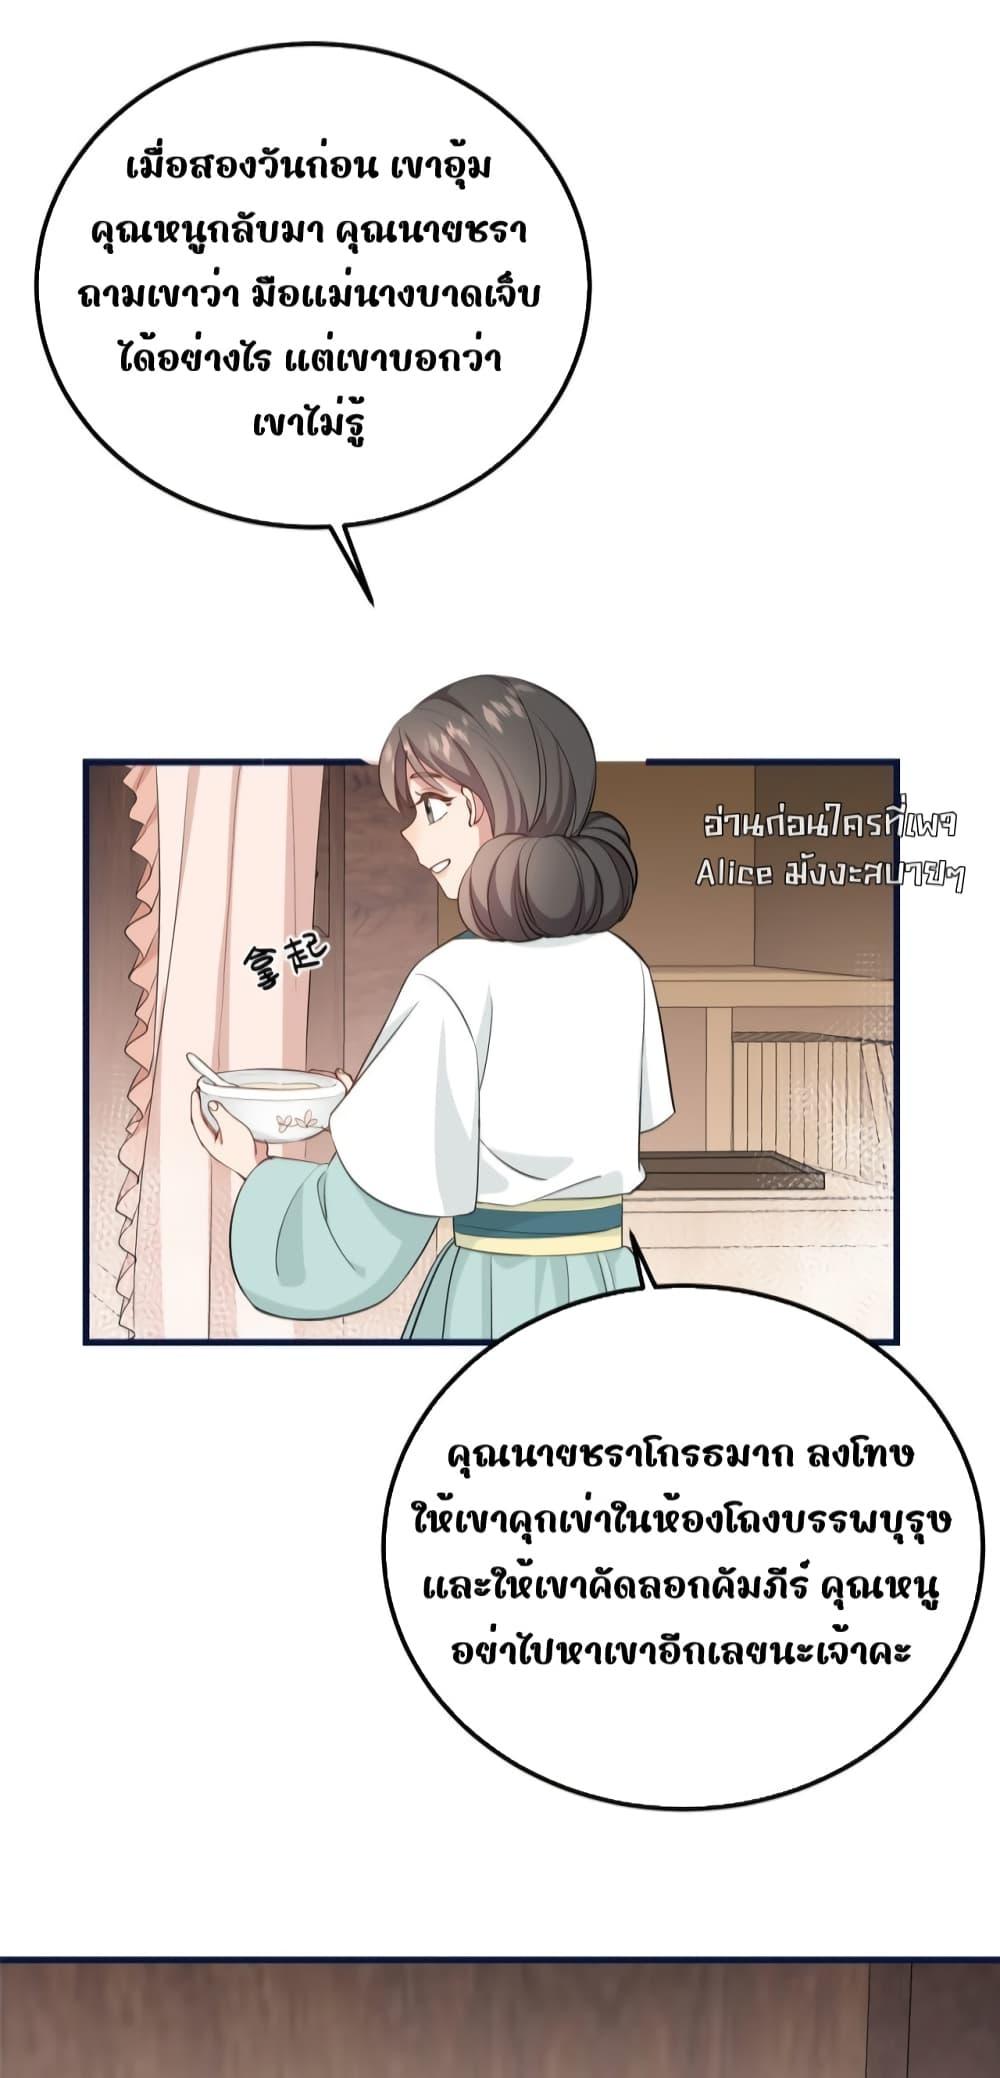 After I Was Reborn, I Became the Petite in the ตอนที่ 4 (22)